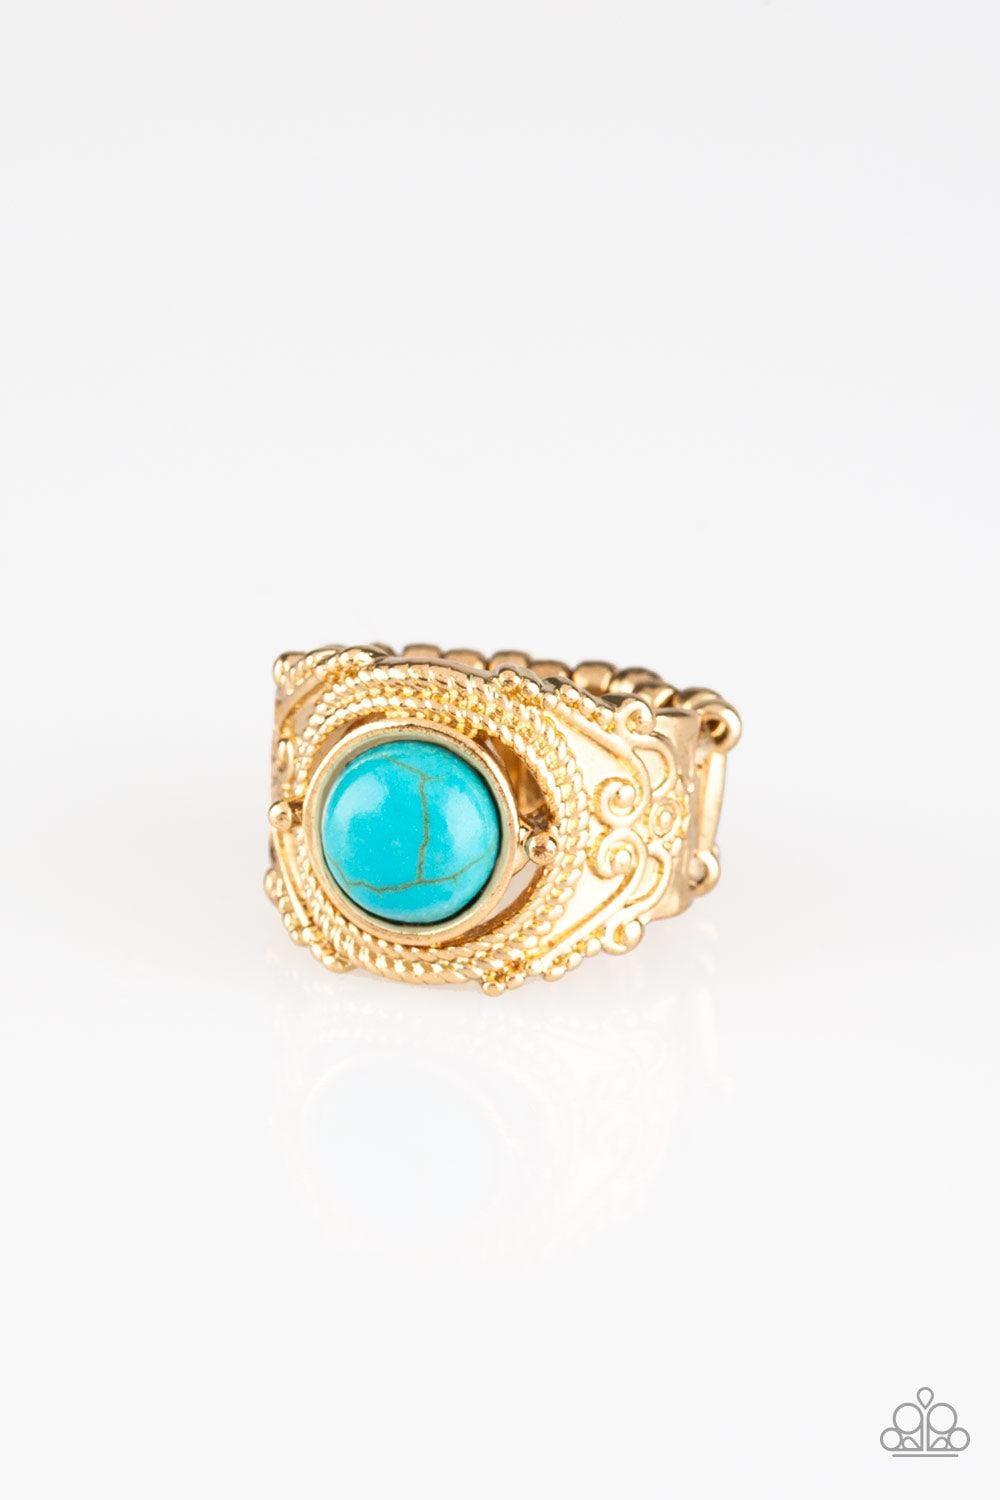 Paparazzi Accessories - Stand Your Ground - Gold Turquoise Ring - Bling by JessieK